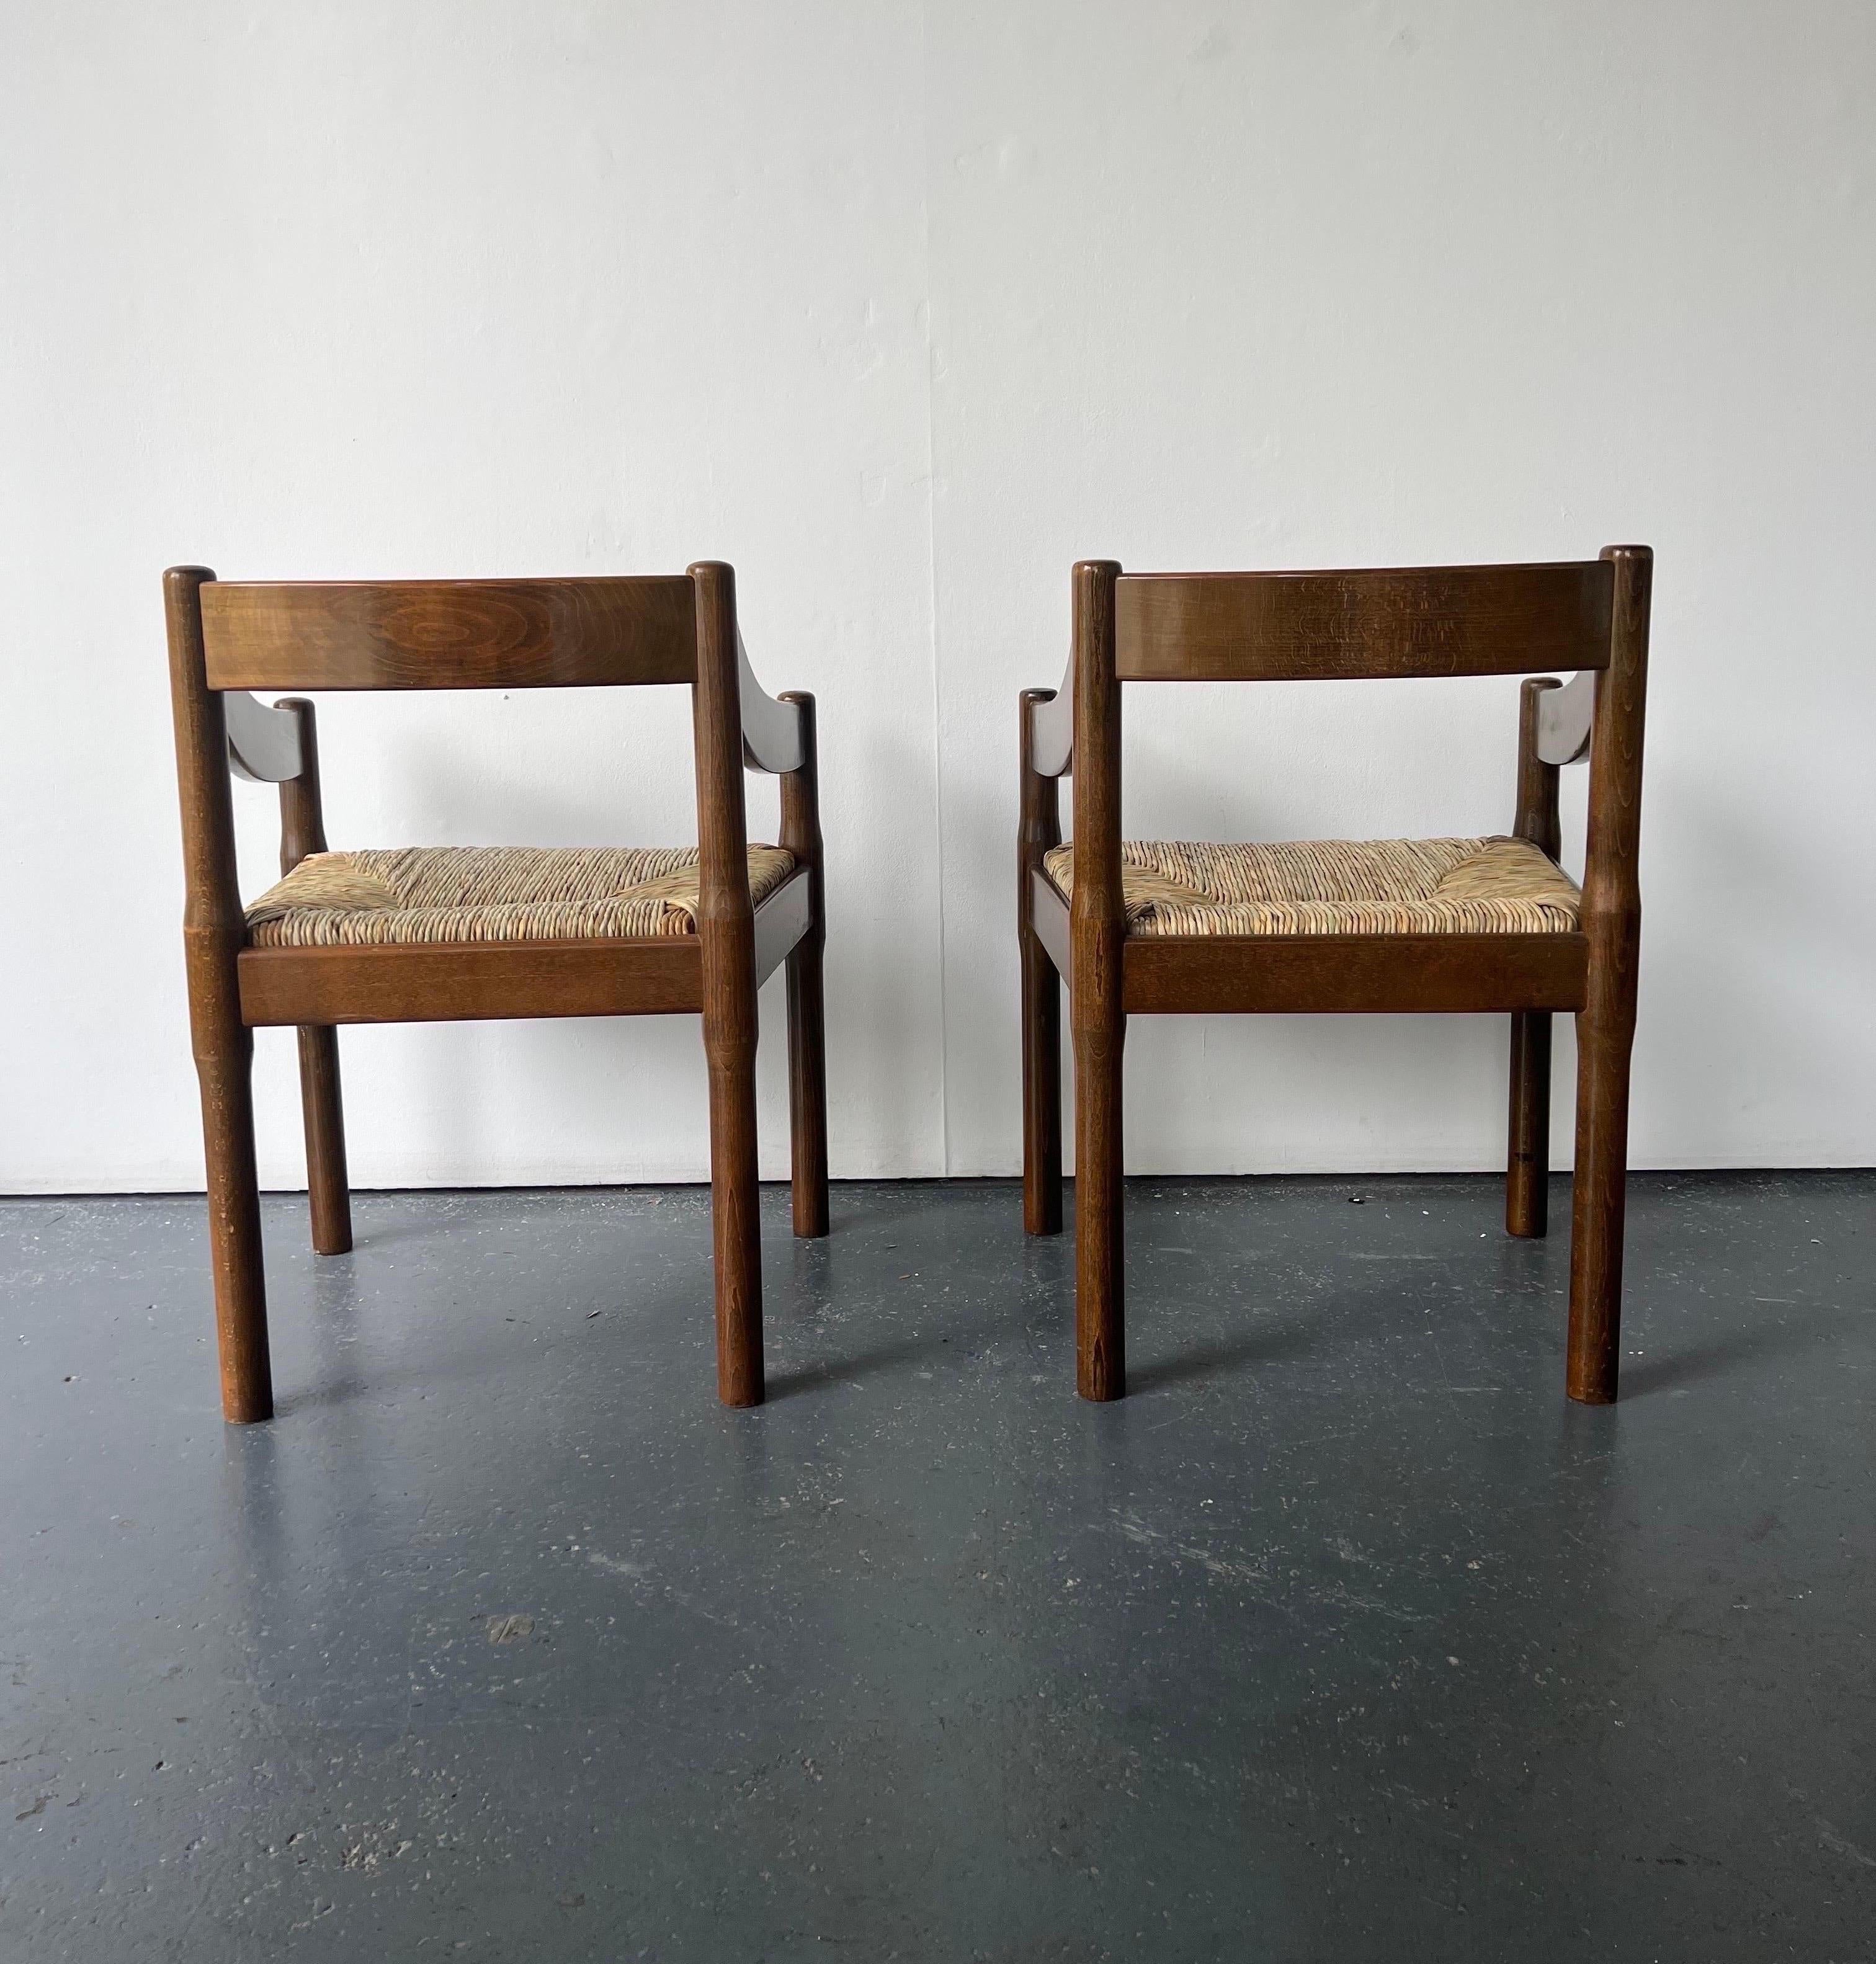 Pair of Dark Wood Carimate Carver Chairs by Vico Magistretti 1